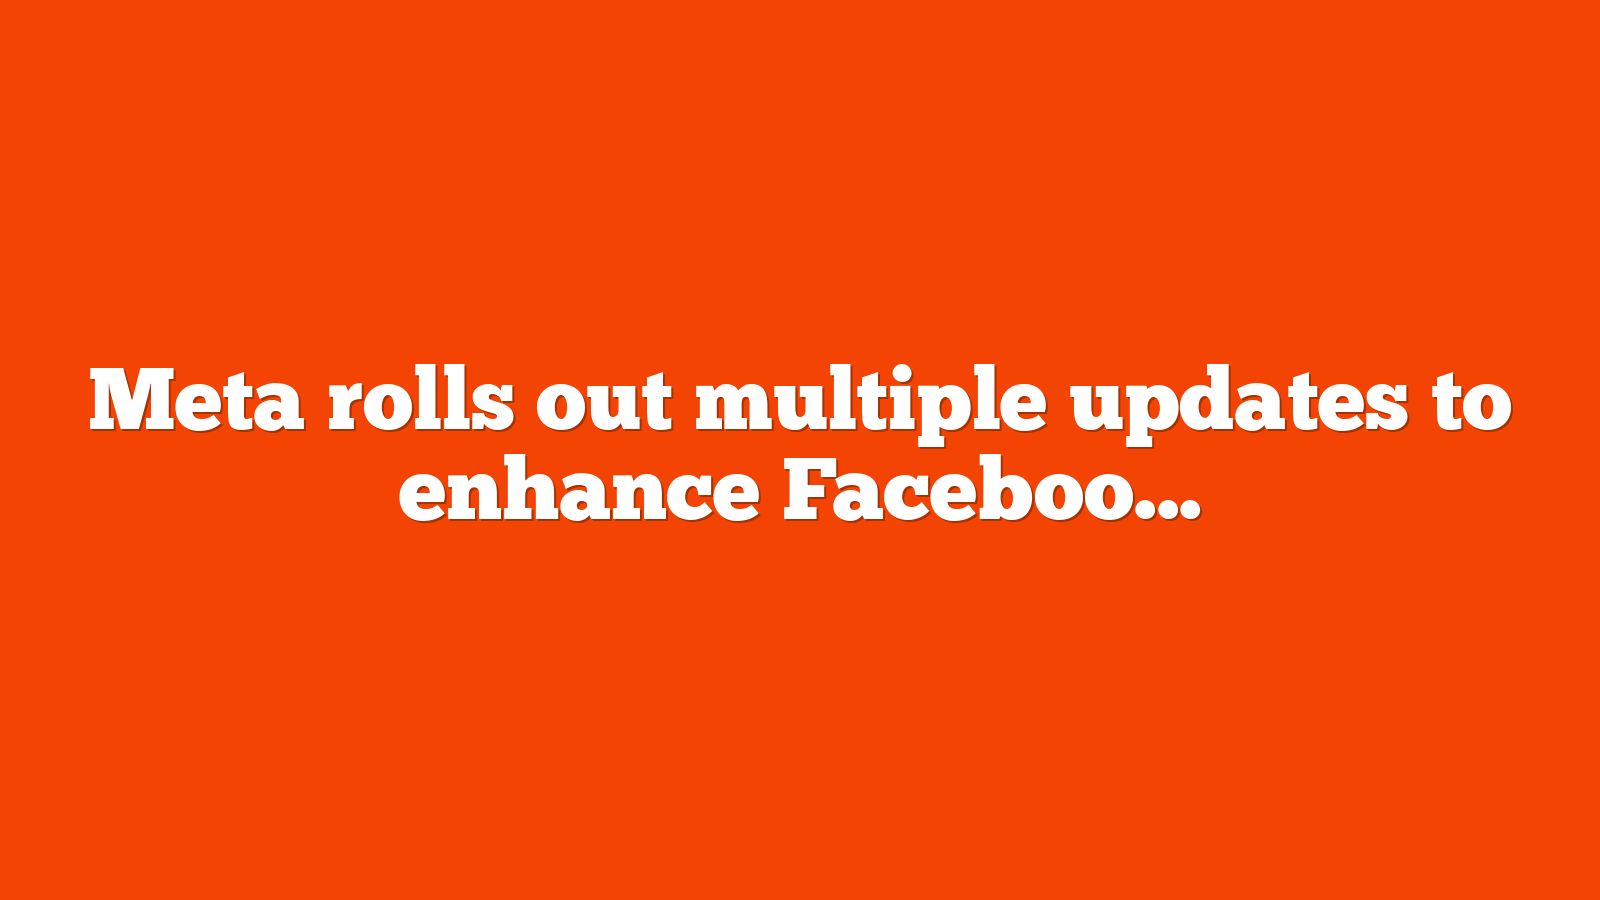 Meta rolls out multiple updates to enhance Facebook video experience